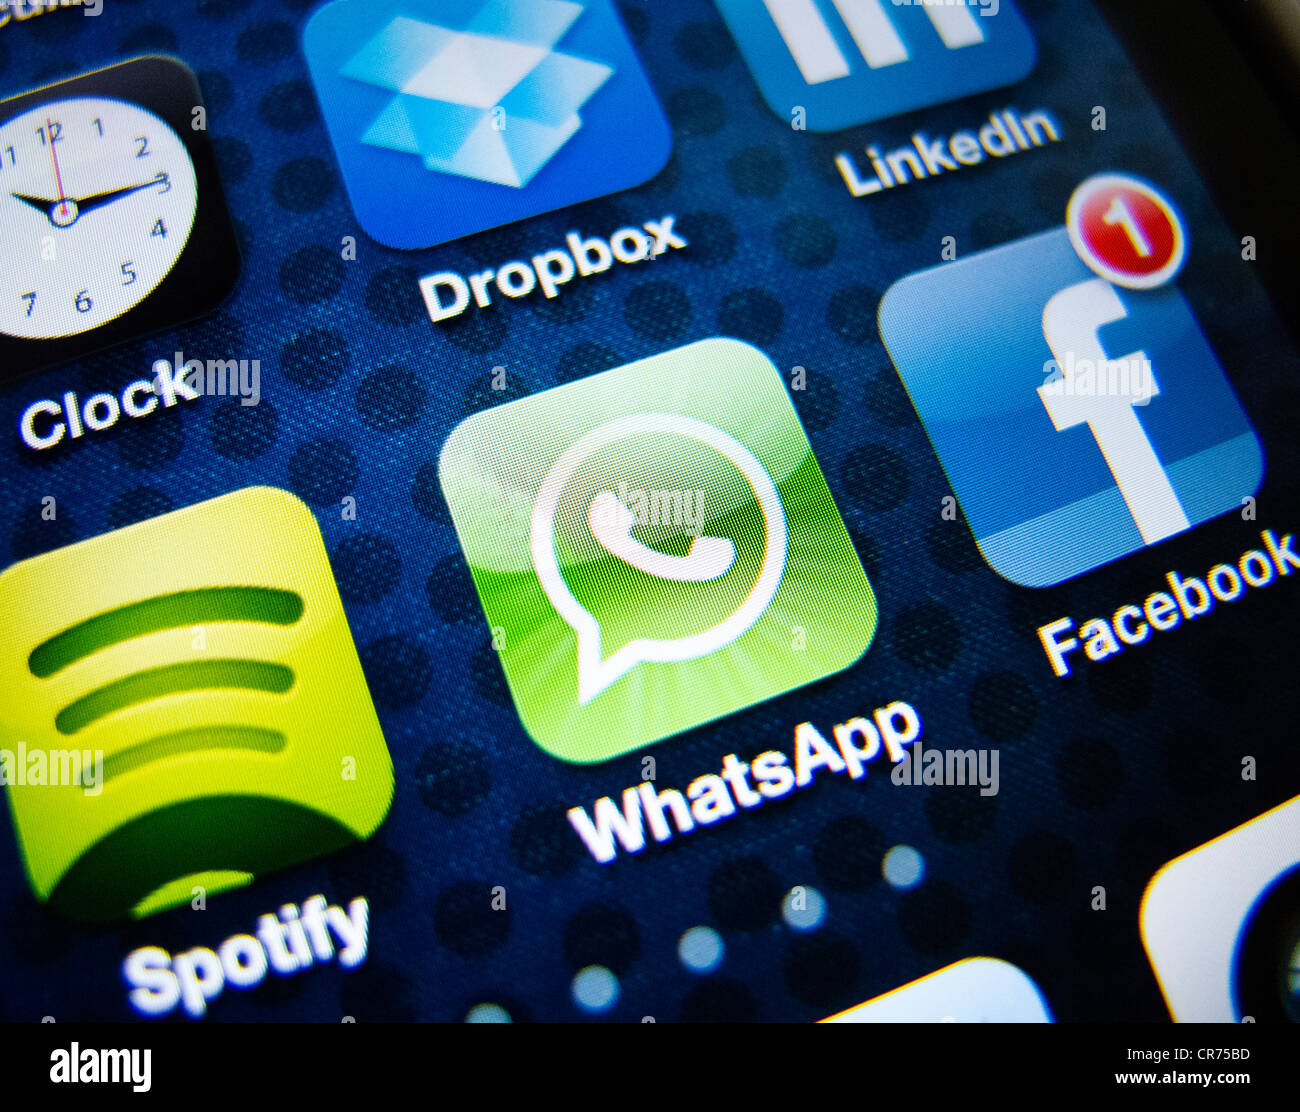 detail of mobile phone screen showing Whatsapp instant messaging app icon Stock Photo